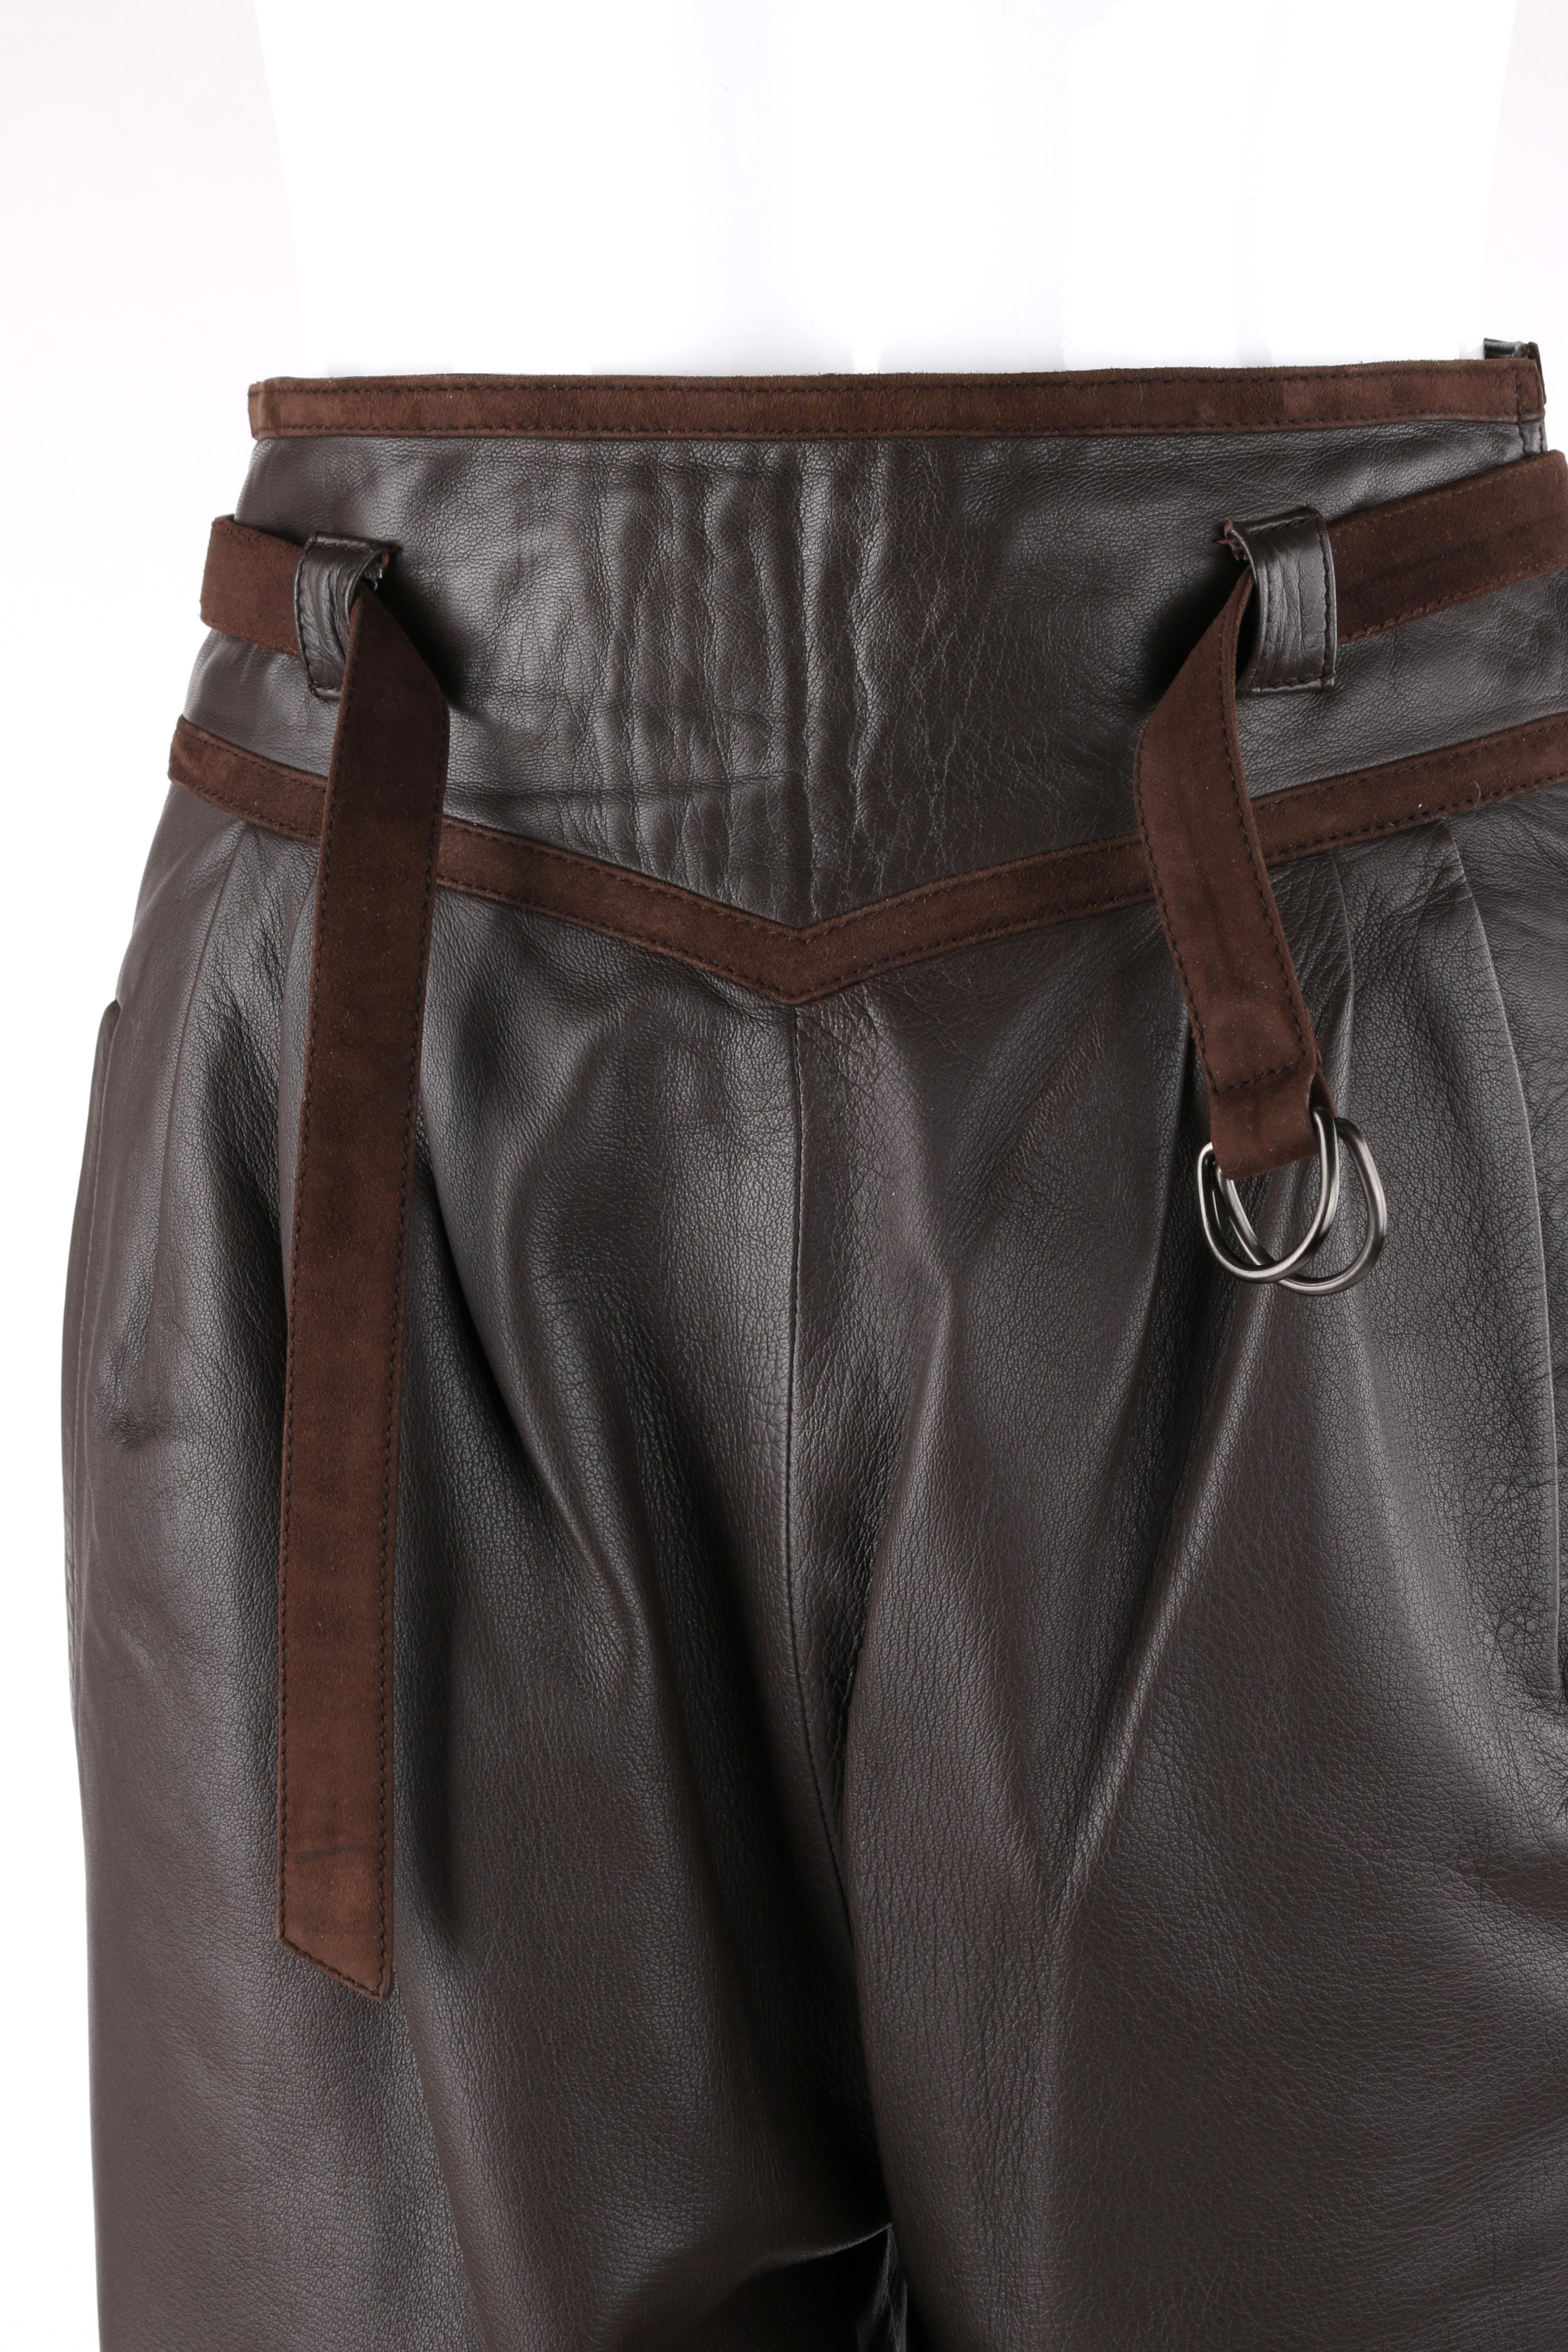 Women's GUCCI c.1970’s Dark Brown Leather High Waisted Tapered Trouser Pants